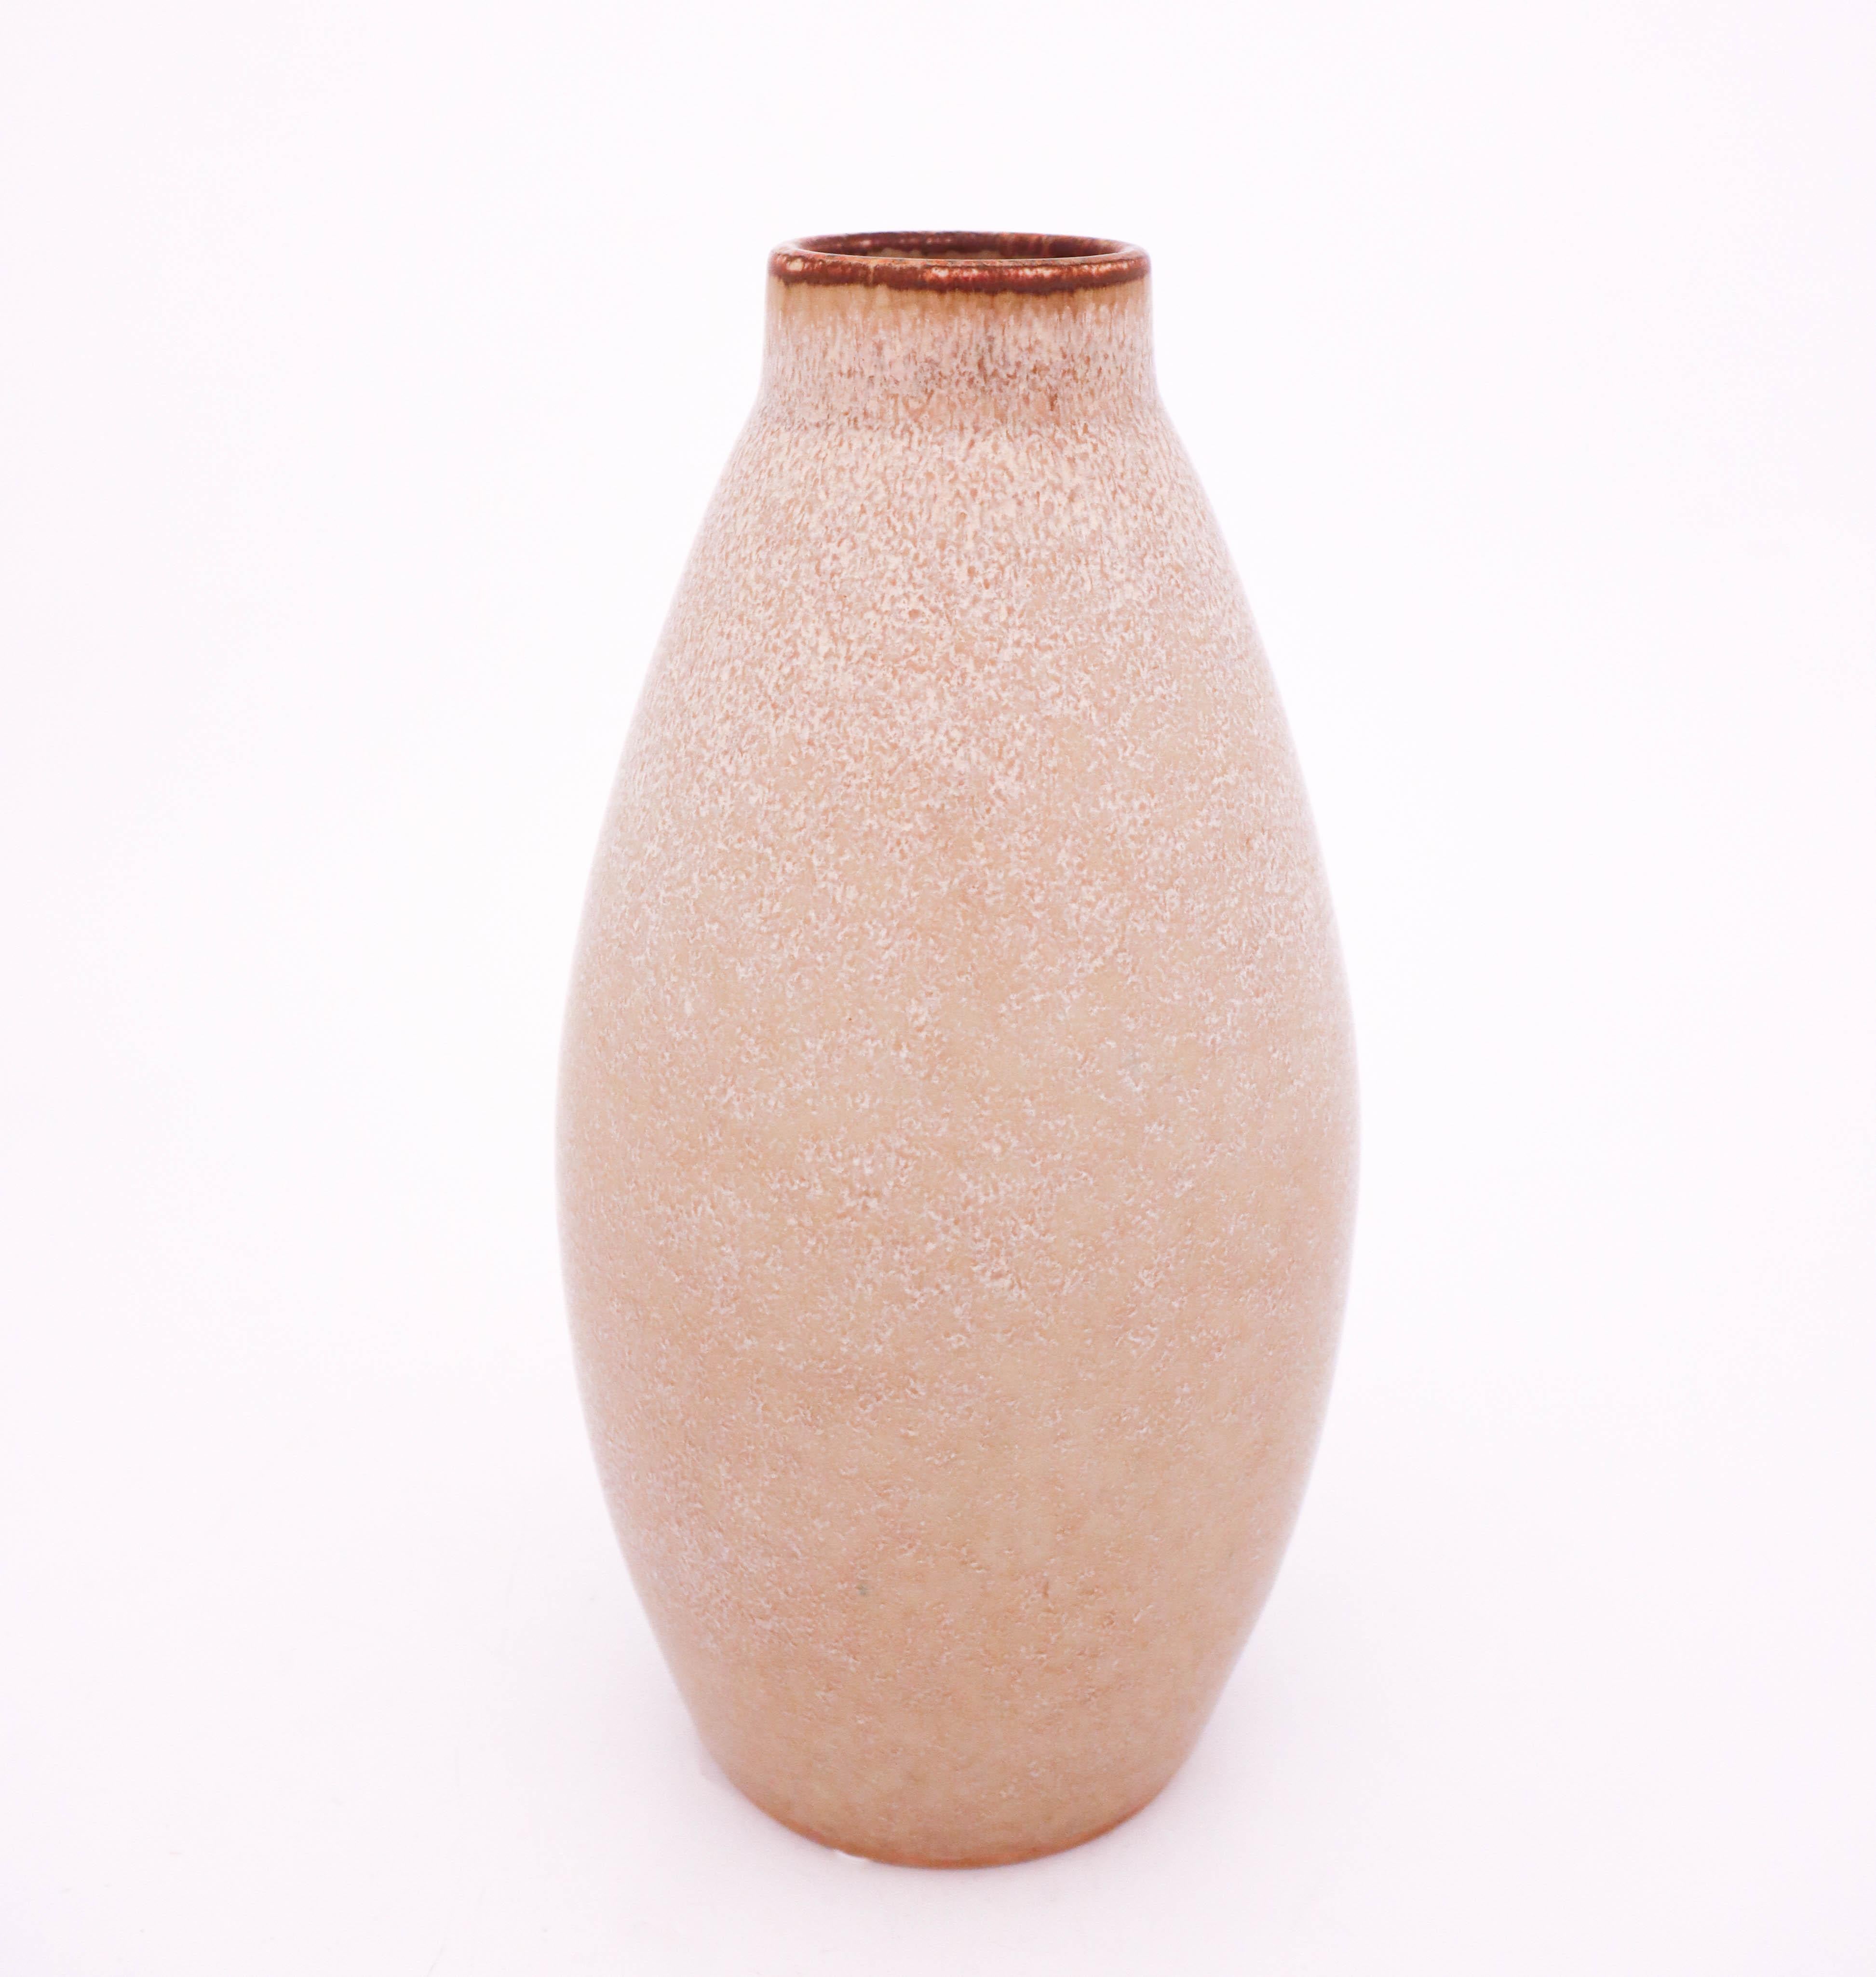 Midcentury Swedish vase in stoneware by Rörstrand, designed by Carl-Harry Stålhane. This large and unique vase was produced in 1963.